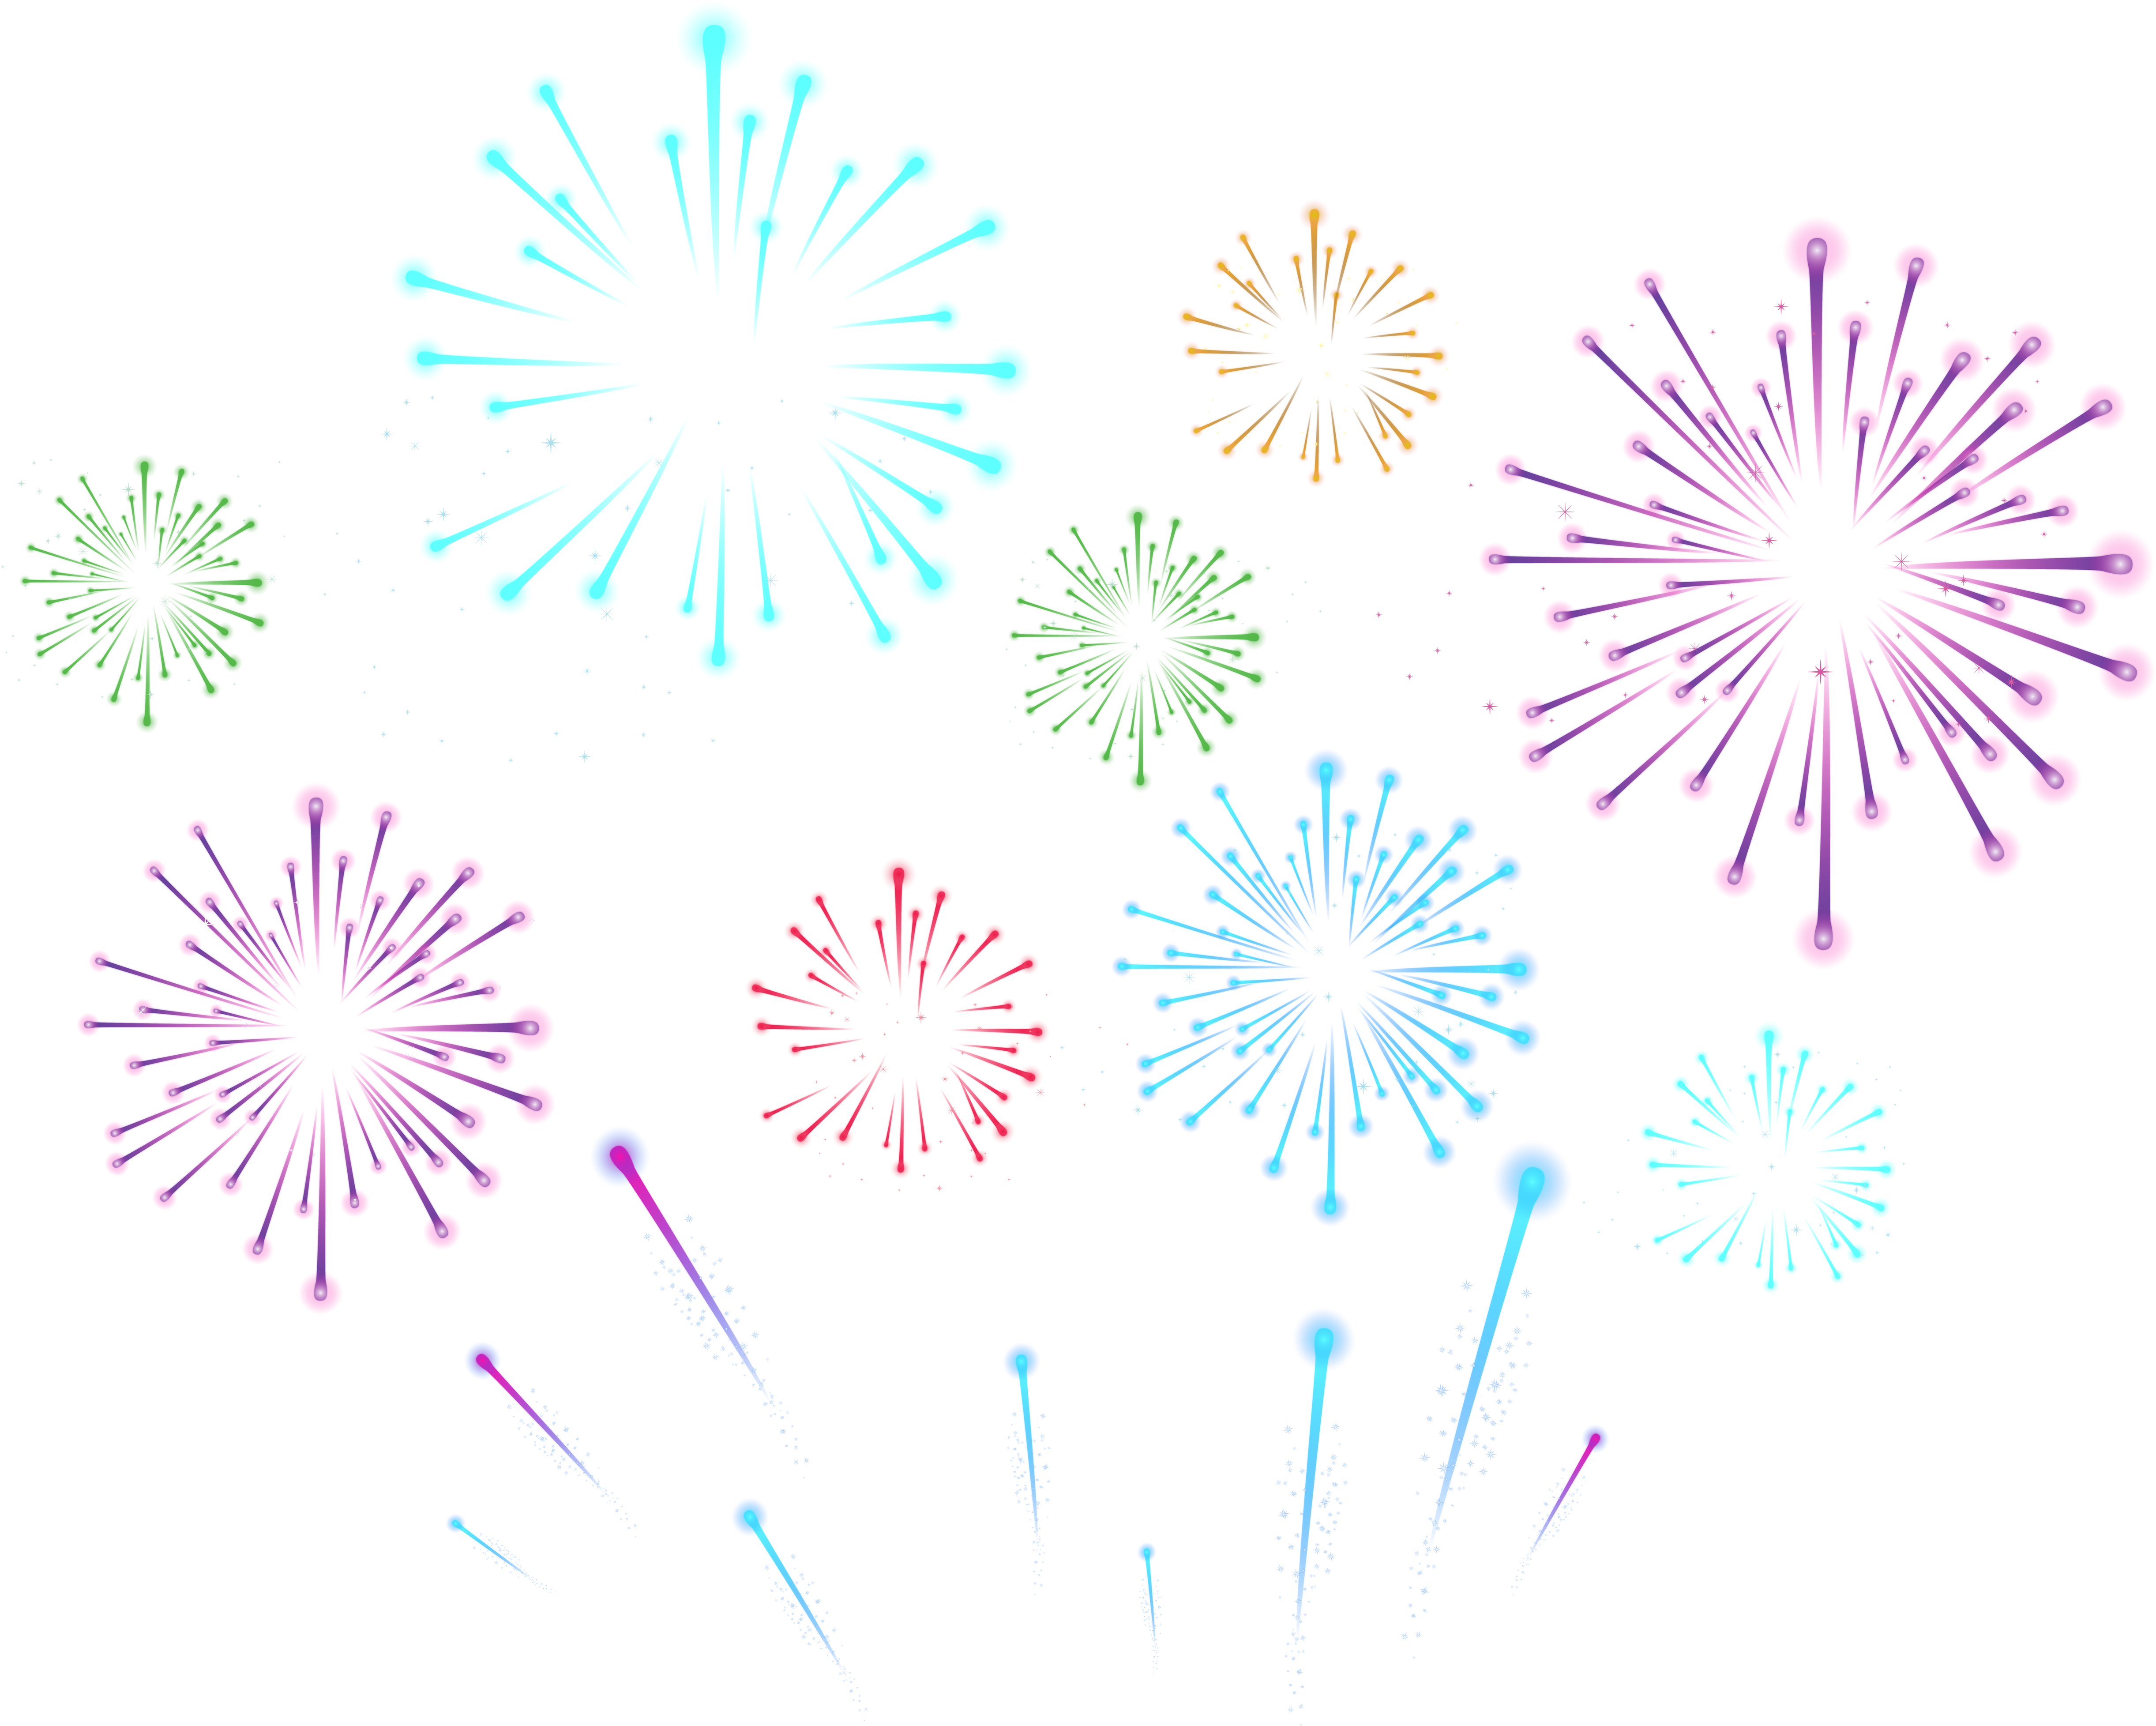 Colorful Fireworks Display Clipart